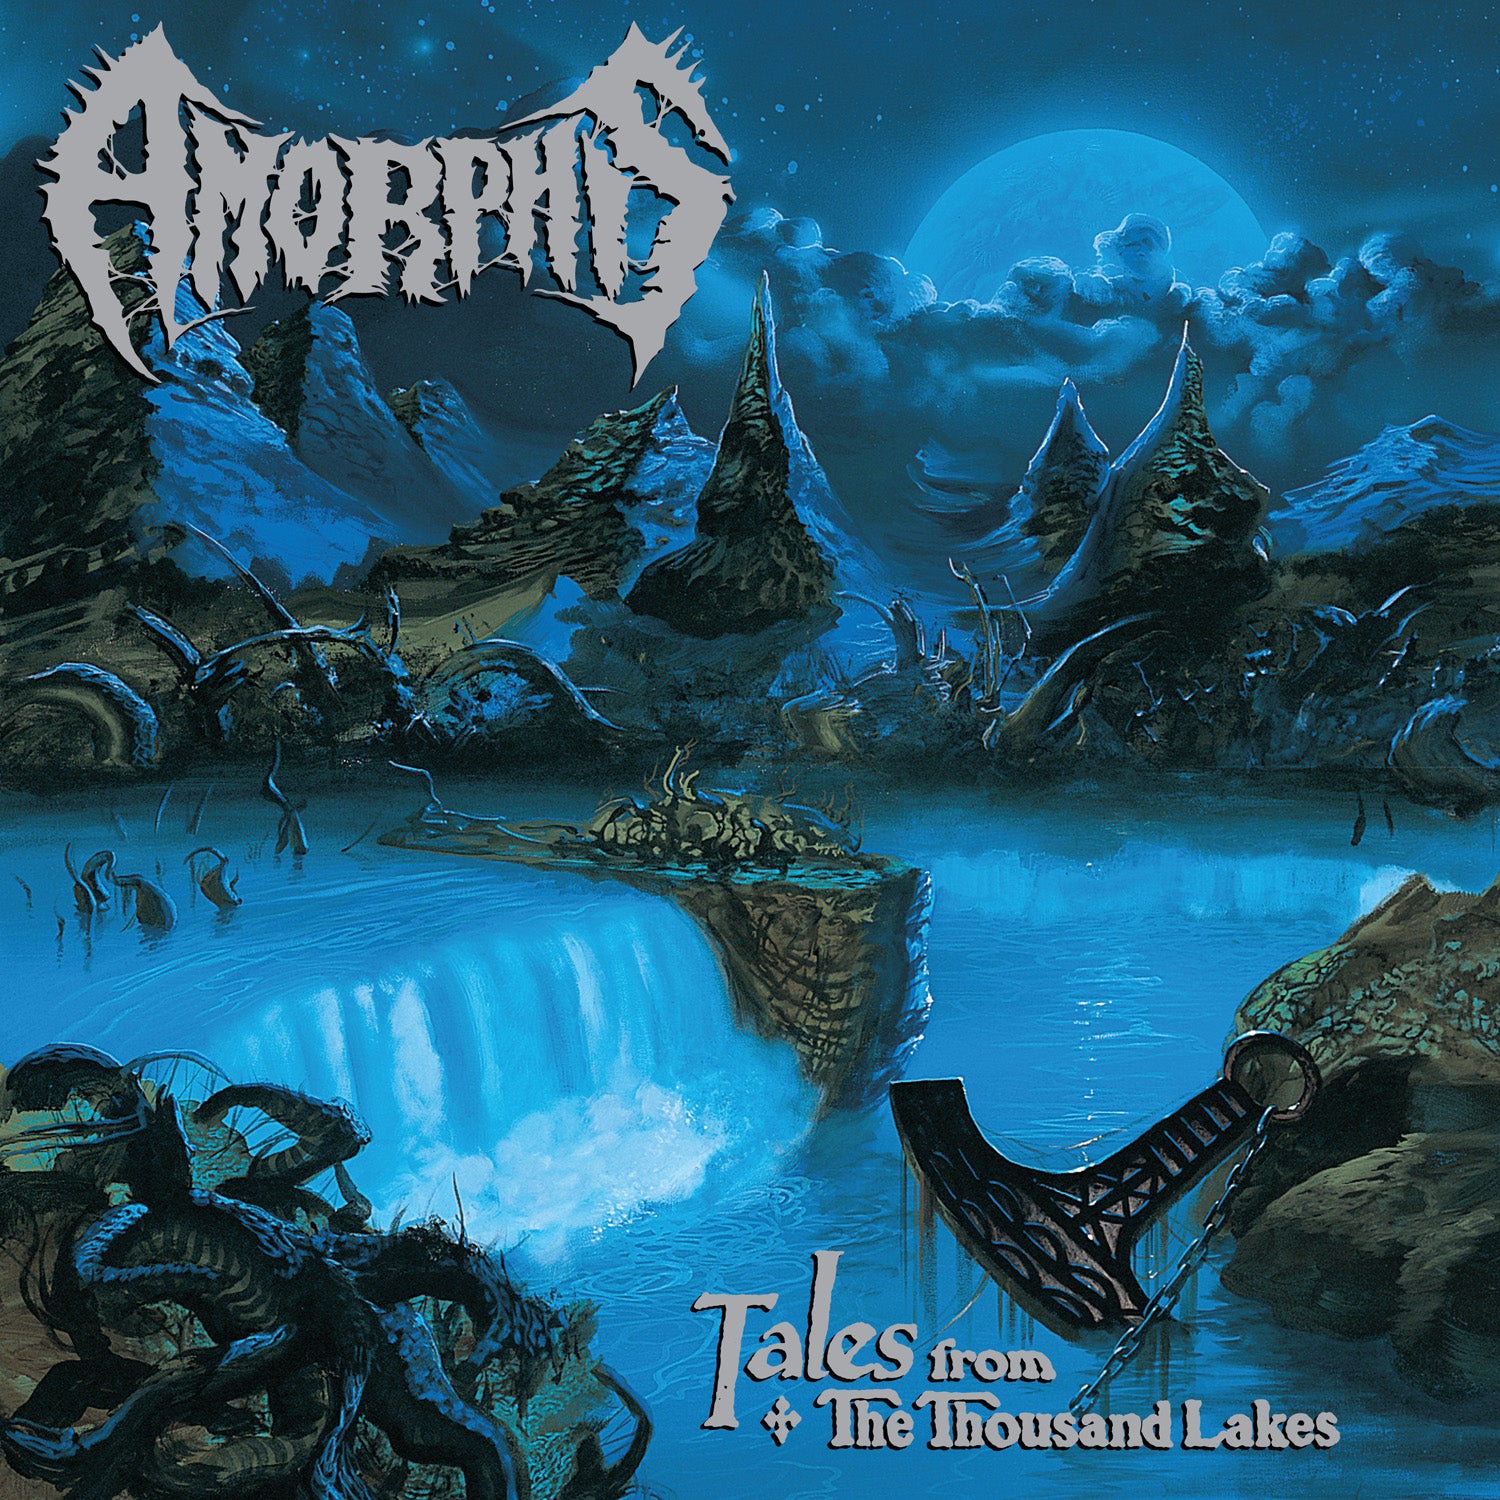 AMORPHIS - TALES FROM THOUSAND LAKES Vinyl LP